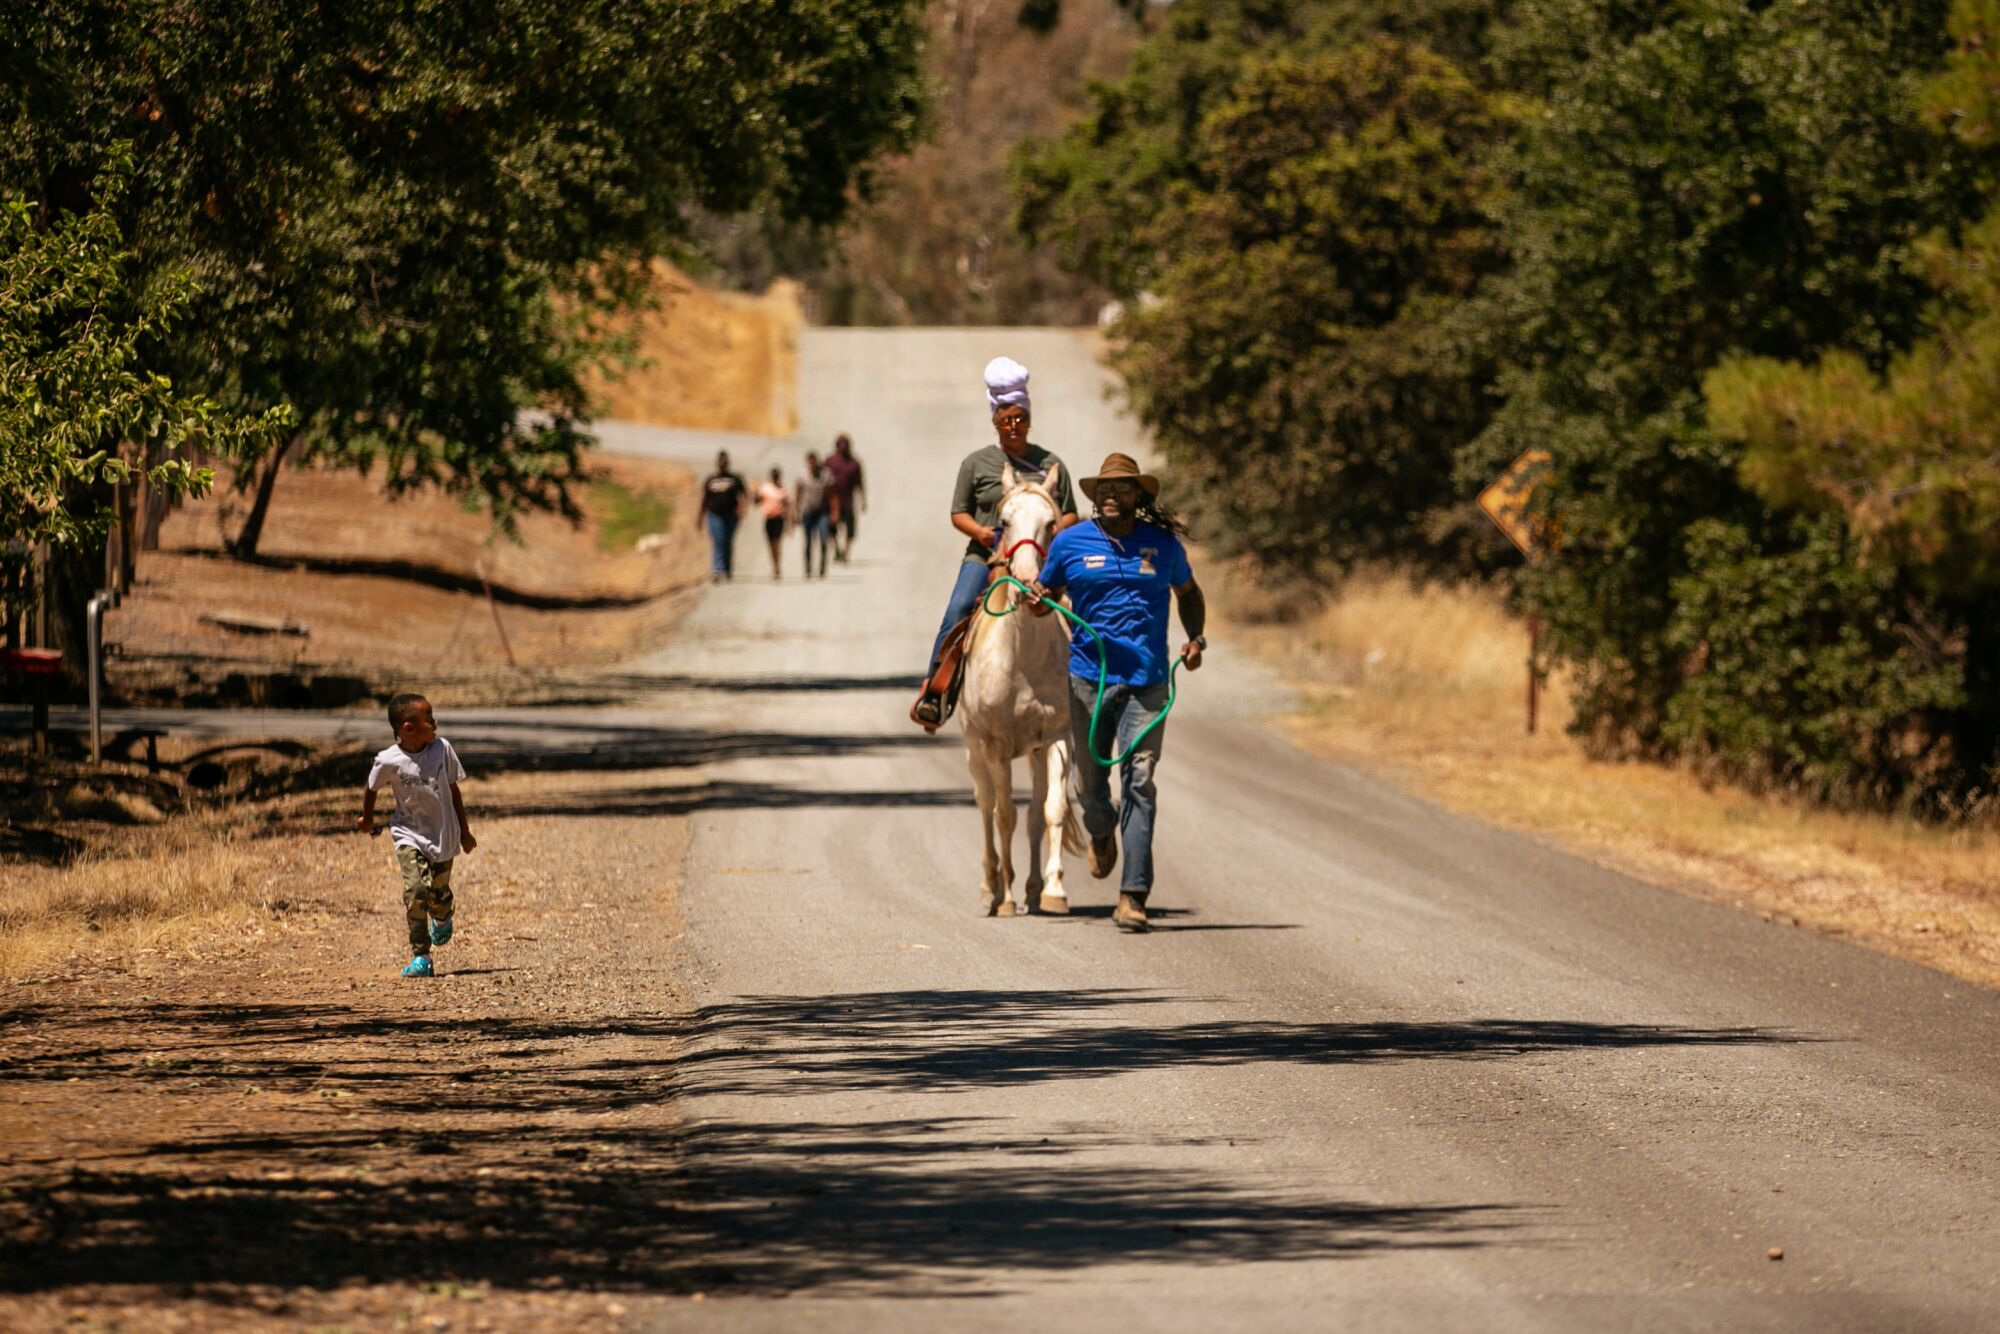 A child running to keep up with a man leading a woman on a horse along on a dirt road, as others walk in the distance 